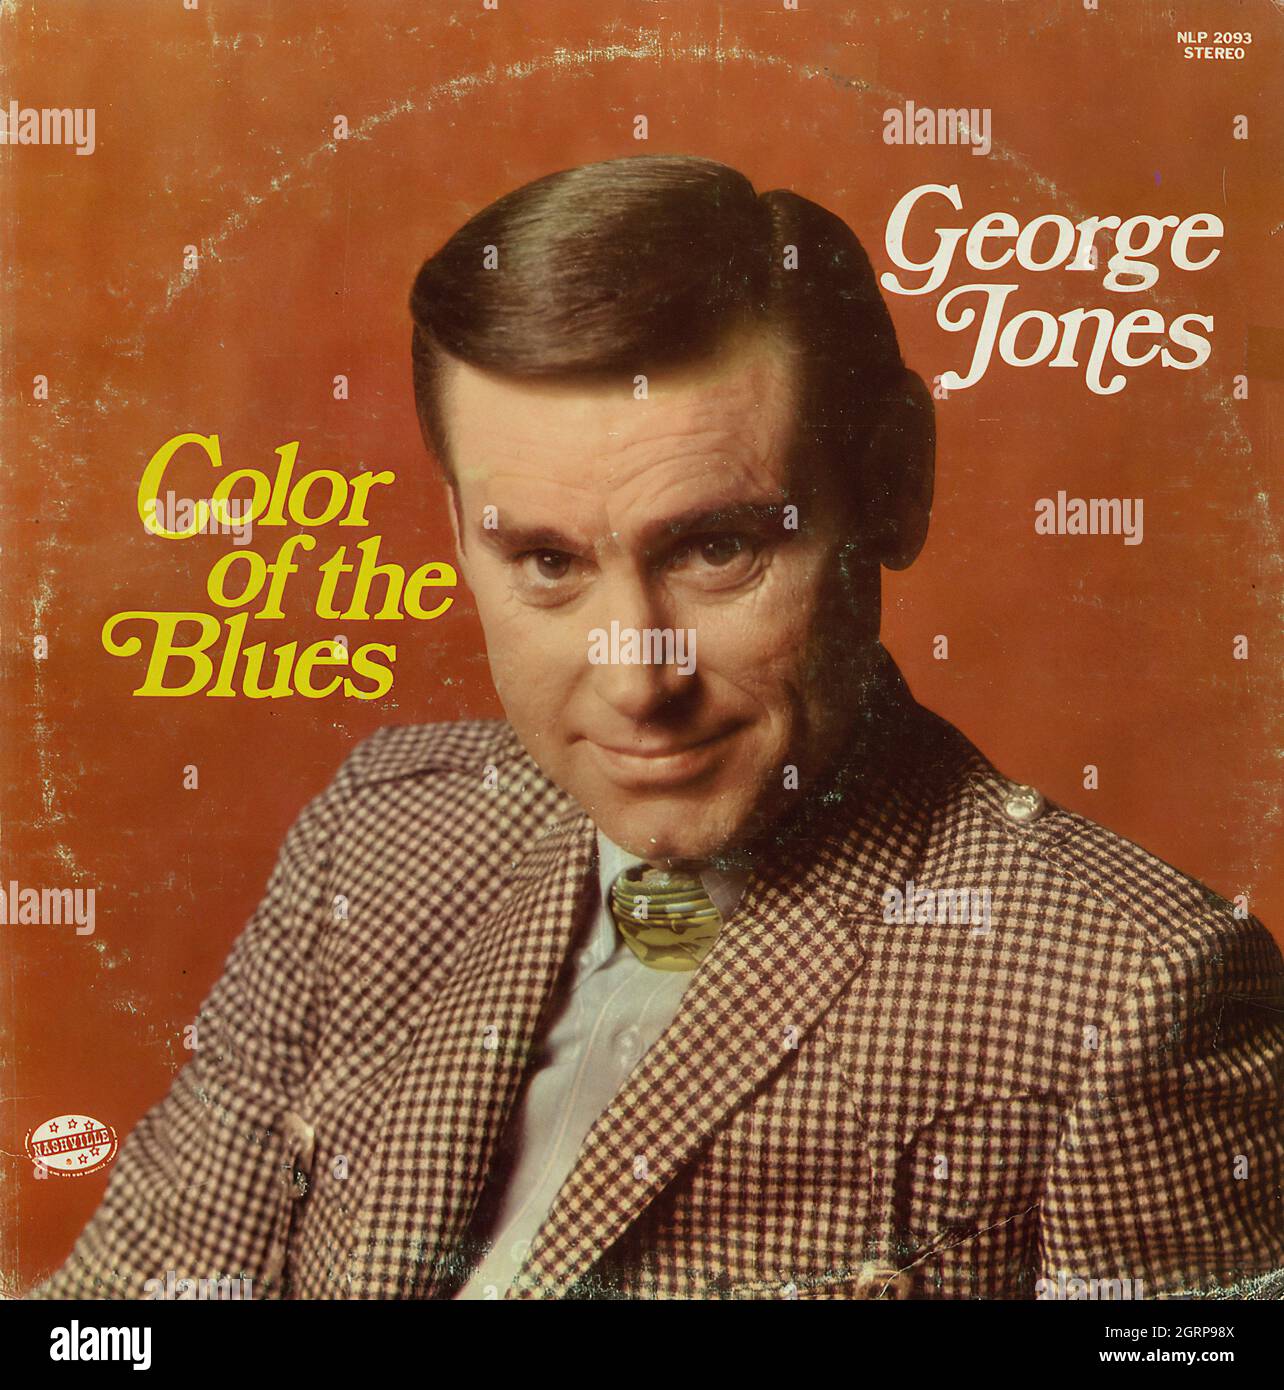 George Jones - Color Of The Blues - Vintage Country Music Album Stockfoto